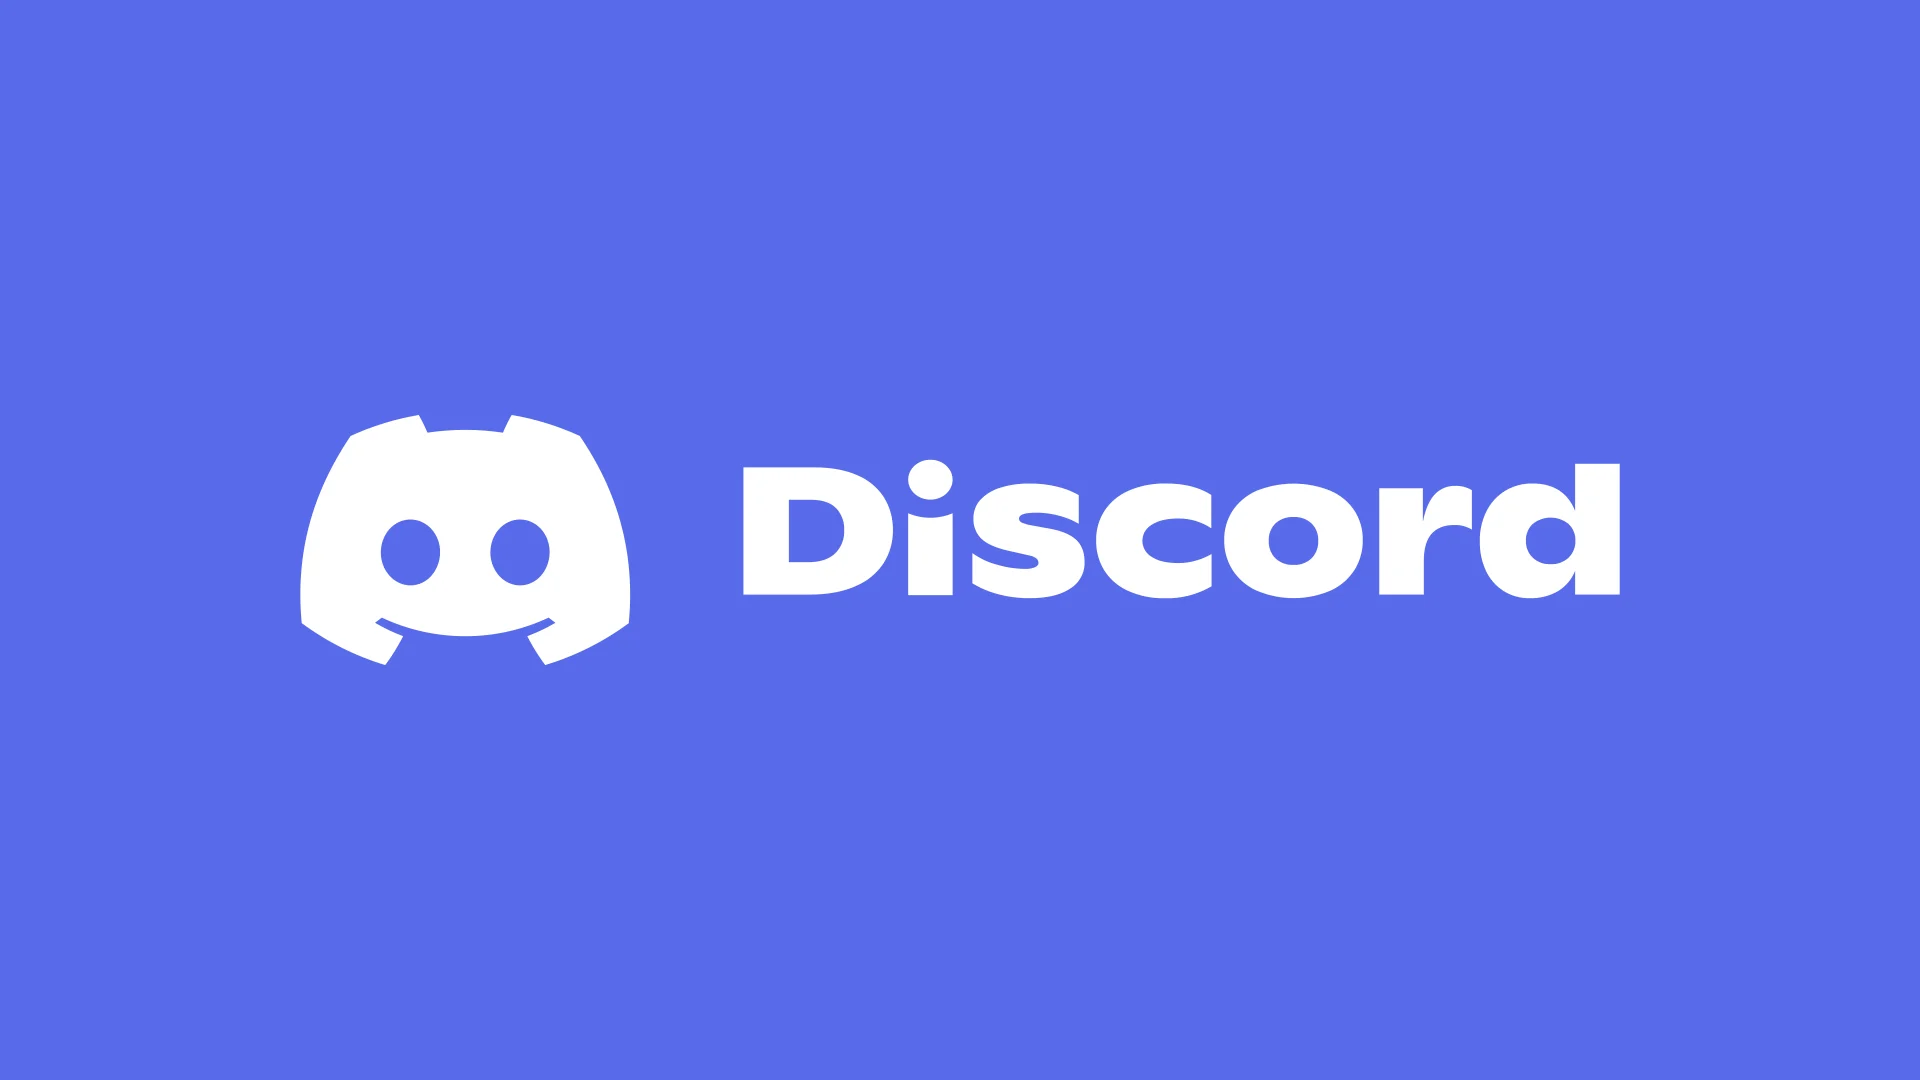 Discord Ditches 4-Digit Codes For Names, Forces Users To Pick New Unique Usernames